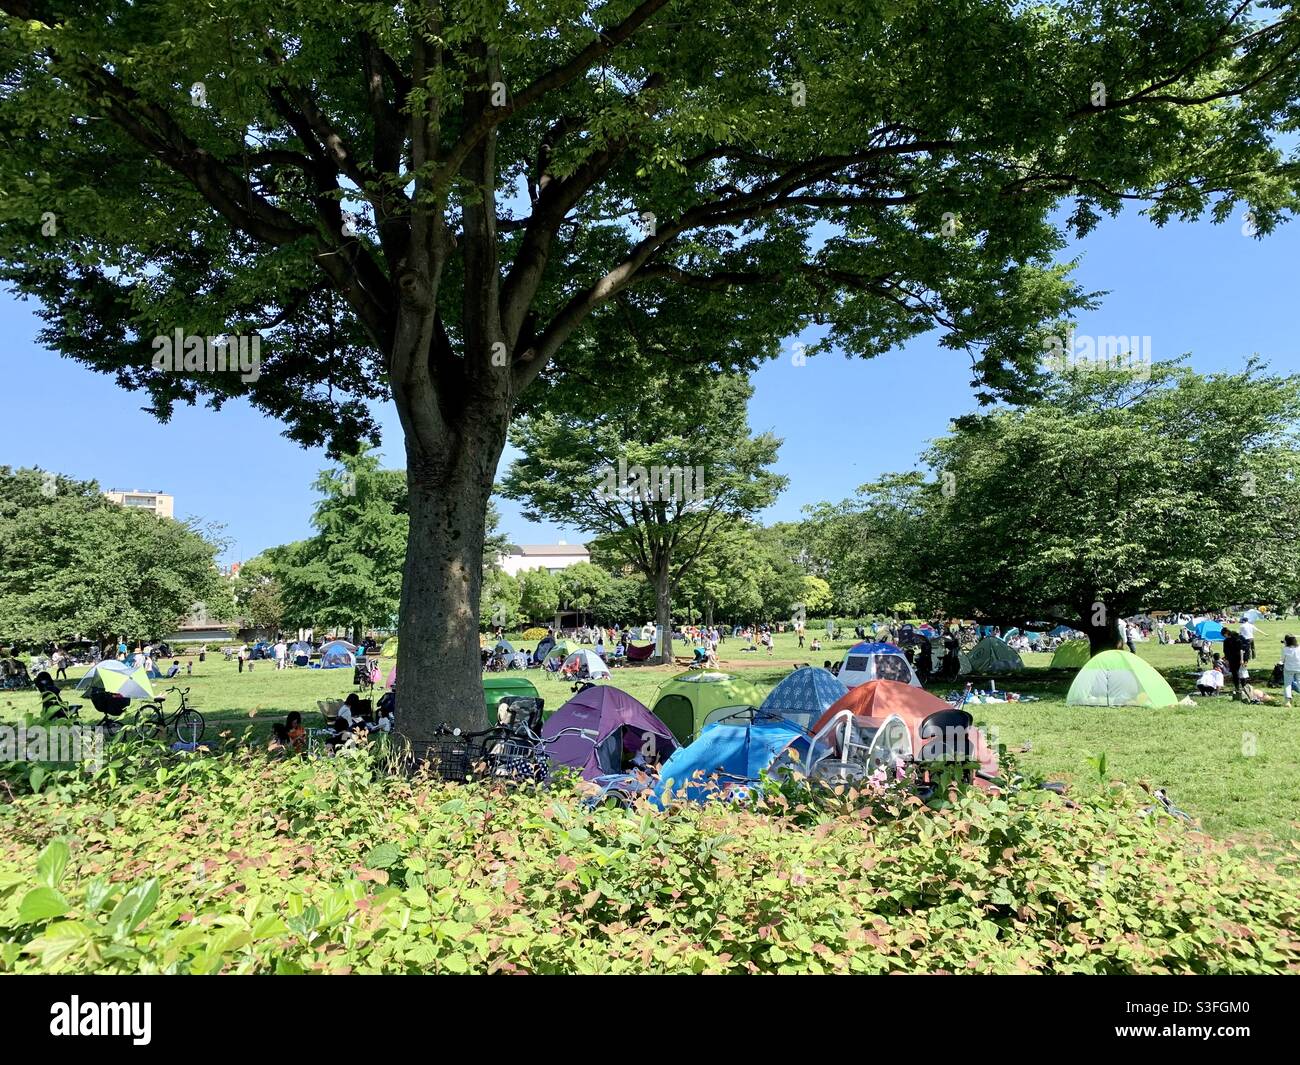 On May 23,2021, Kiba Park in Koto City,Tokyo, over crowded because of the State of Emergency. On the other hand, to keep children happy, parents had to out. Park was full with Tents. Stock Photo